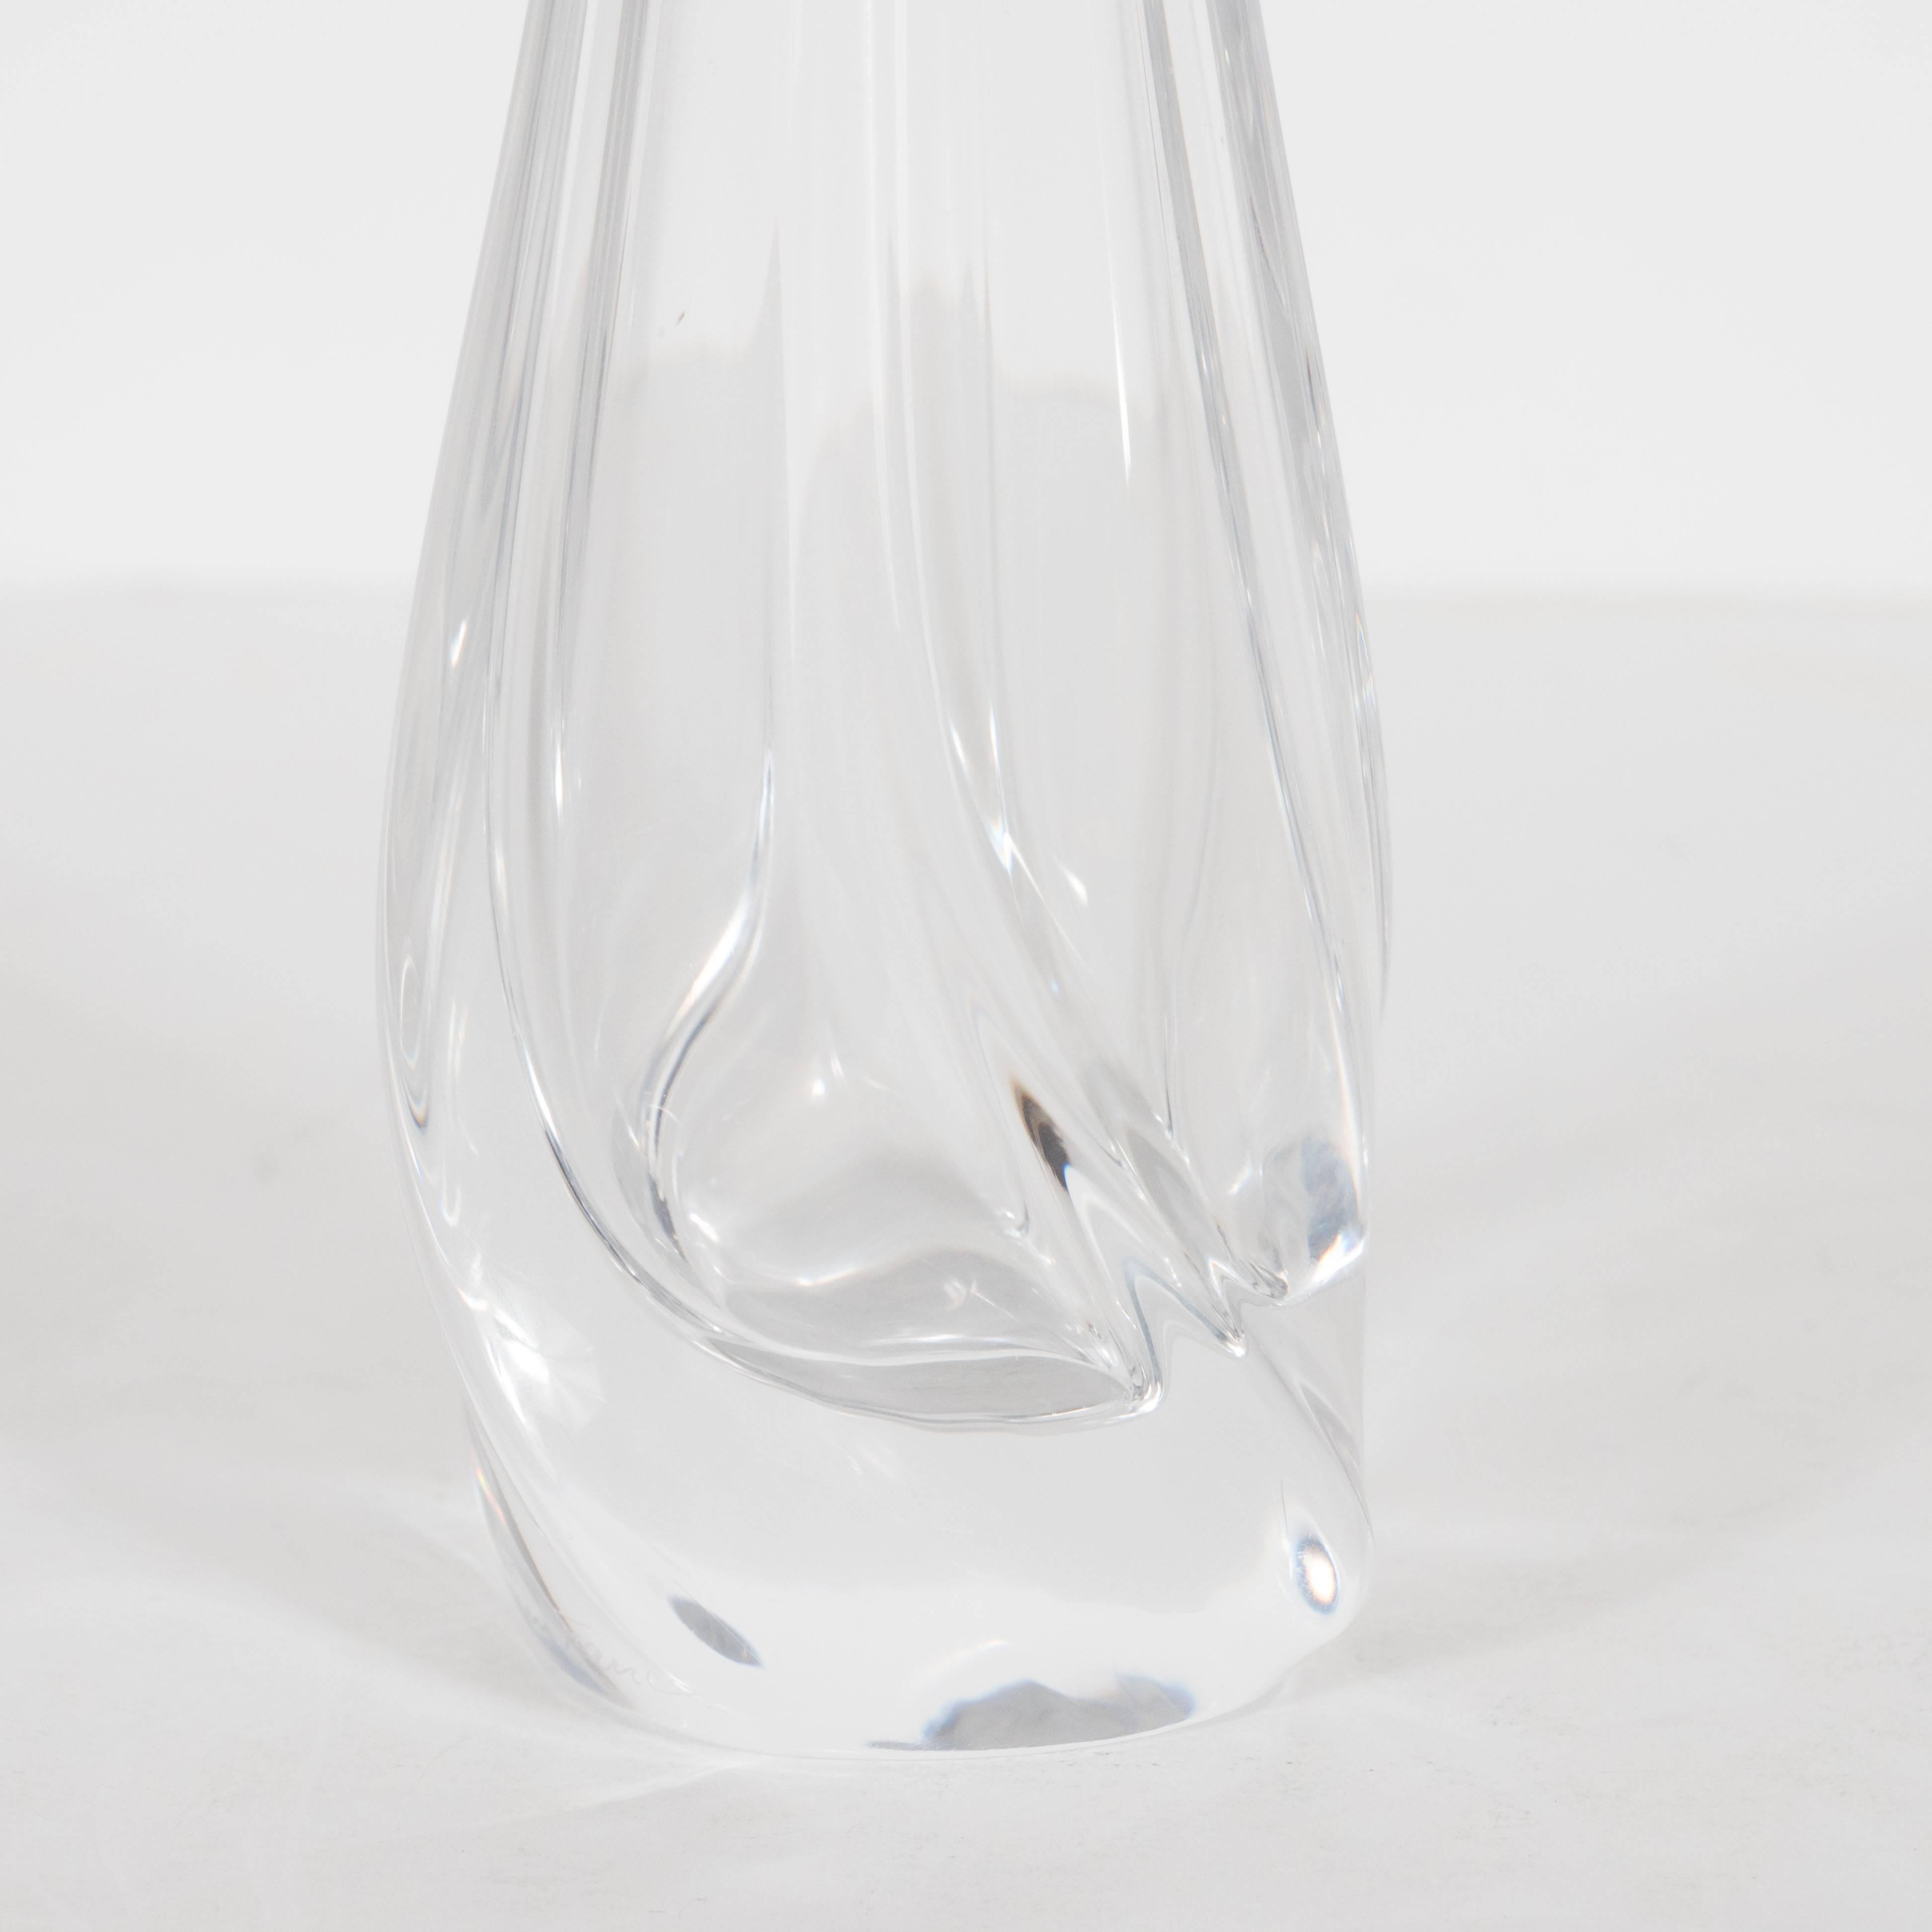 French Mid-Century Modern Translucent Sinuous Glass Vase by Daum France 2